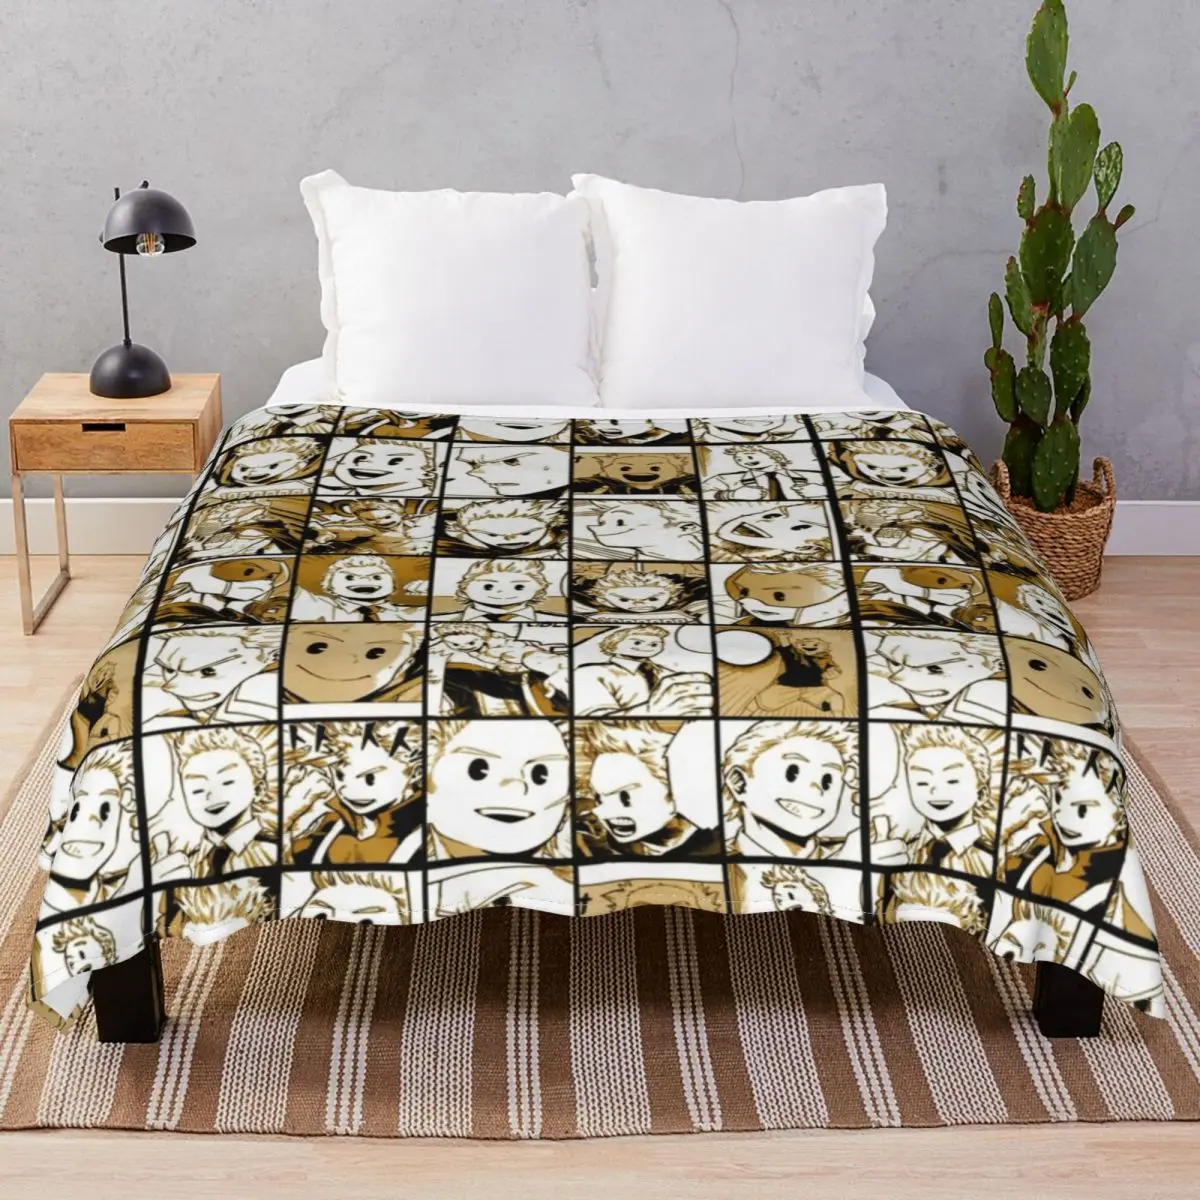 

Mirio Togata Collage Blankets Coral Fleece Plush Decoration Warm Throw Blanket for Bed Home Couch Travel Office